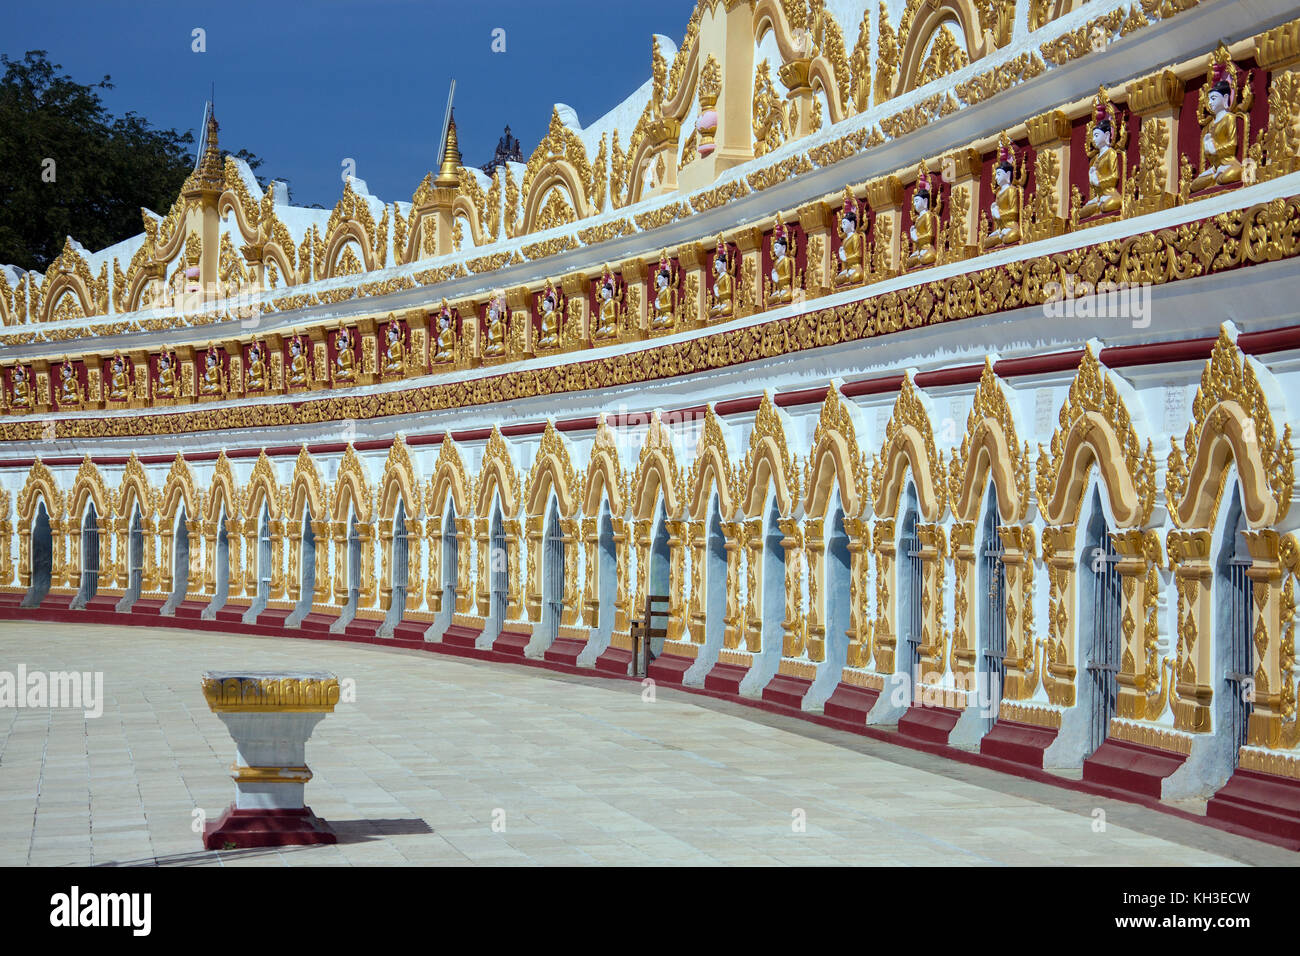 U Min Thonze Cave - A greatly revered Buddhist temple at Sagaing in Myanmar (Burma) Stock Photo